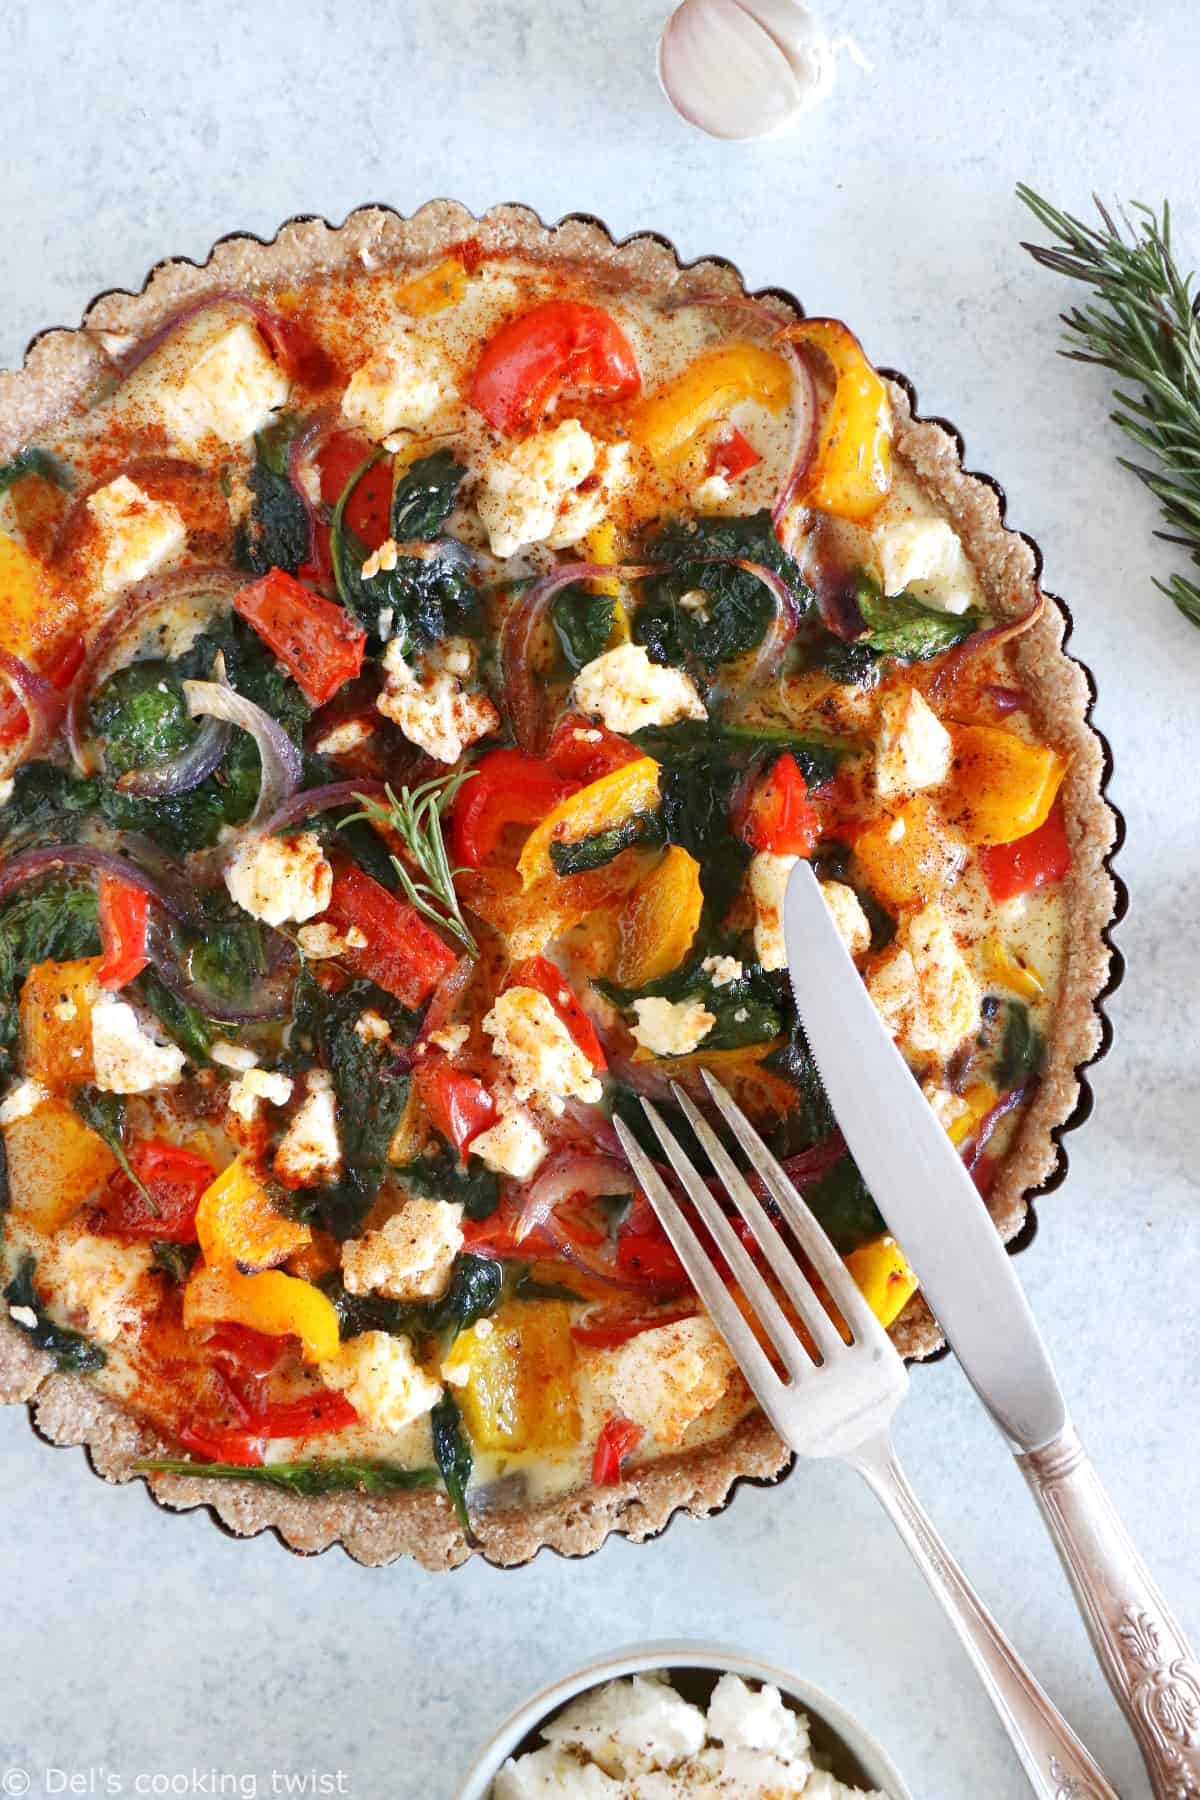 Mediterranean Vegetable Quiche is packed with sun-drenched summer vegetables, feta cheese, and my favorite olive oil whole wheat pie crust.